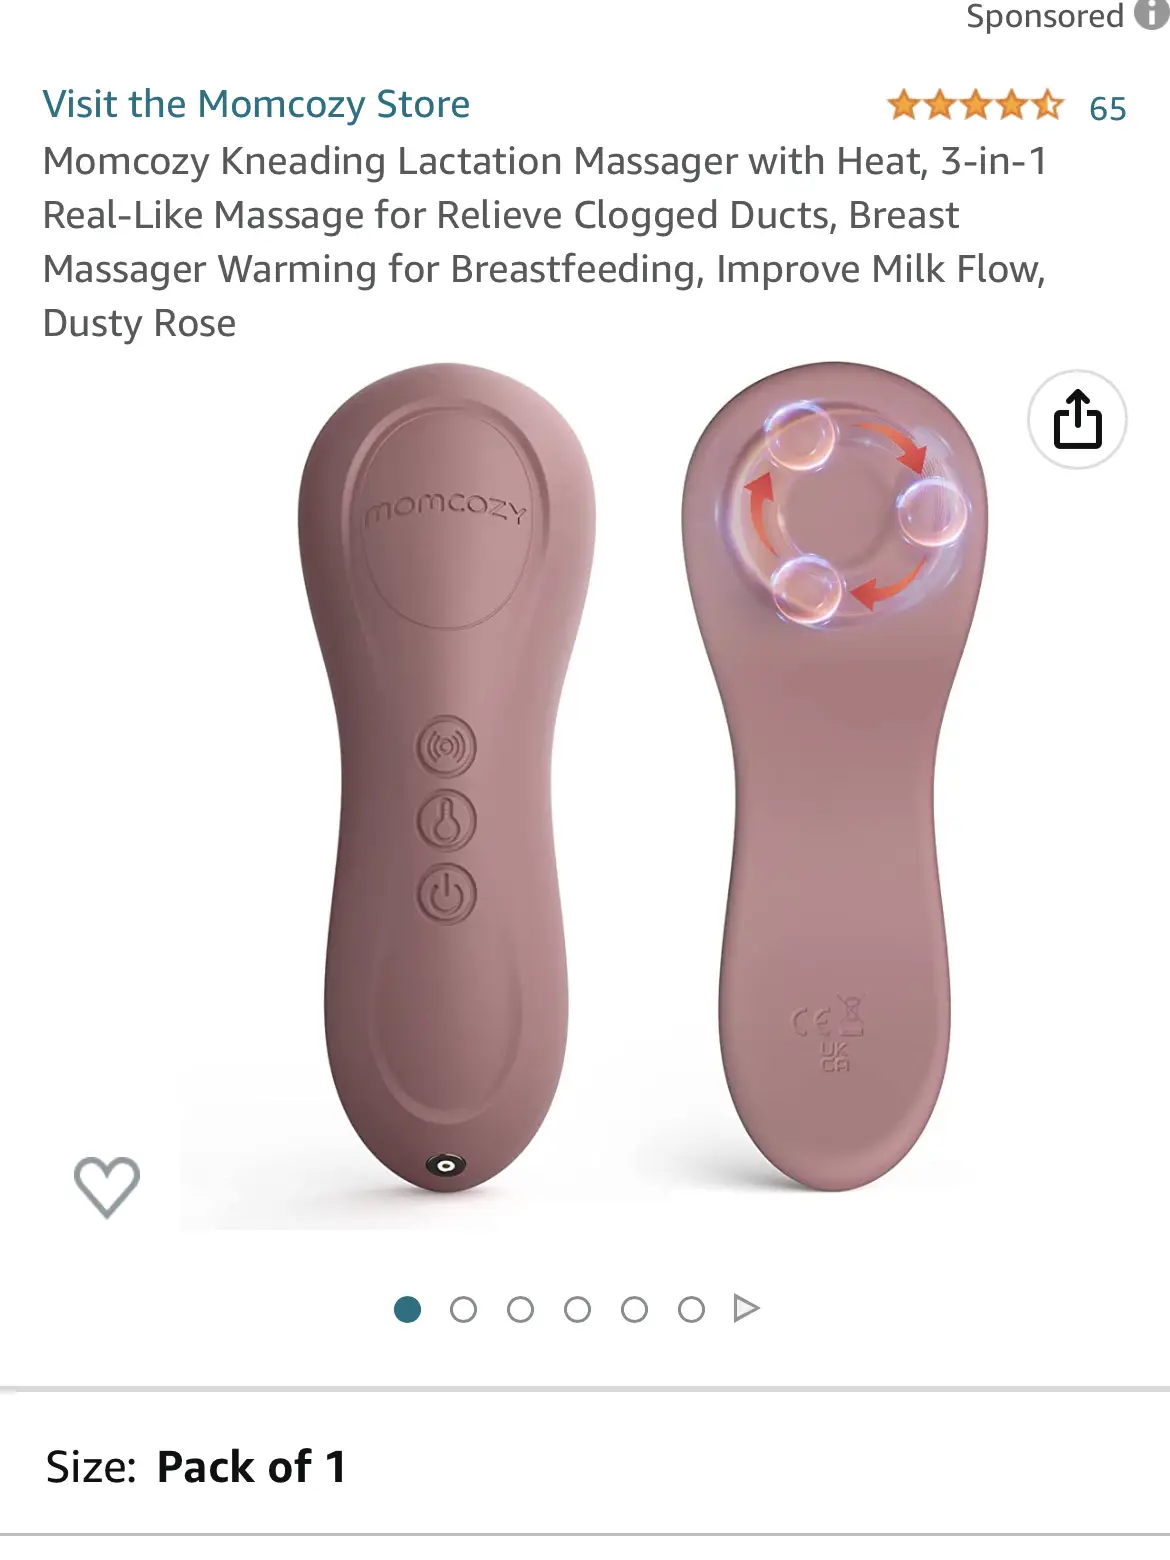 Momcozy Lactation Massager for Breastfeeding 3-in-1, 1 Pack Kneading Breast  Massager with Heat 